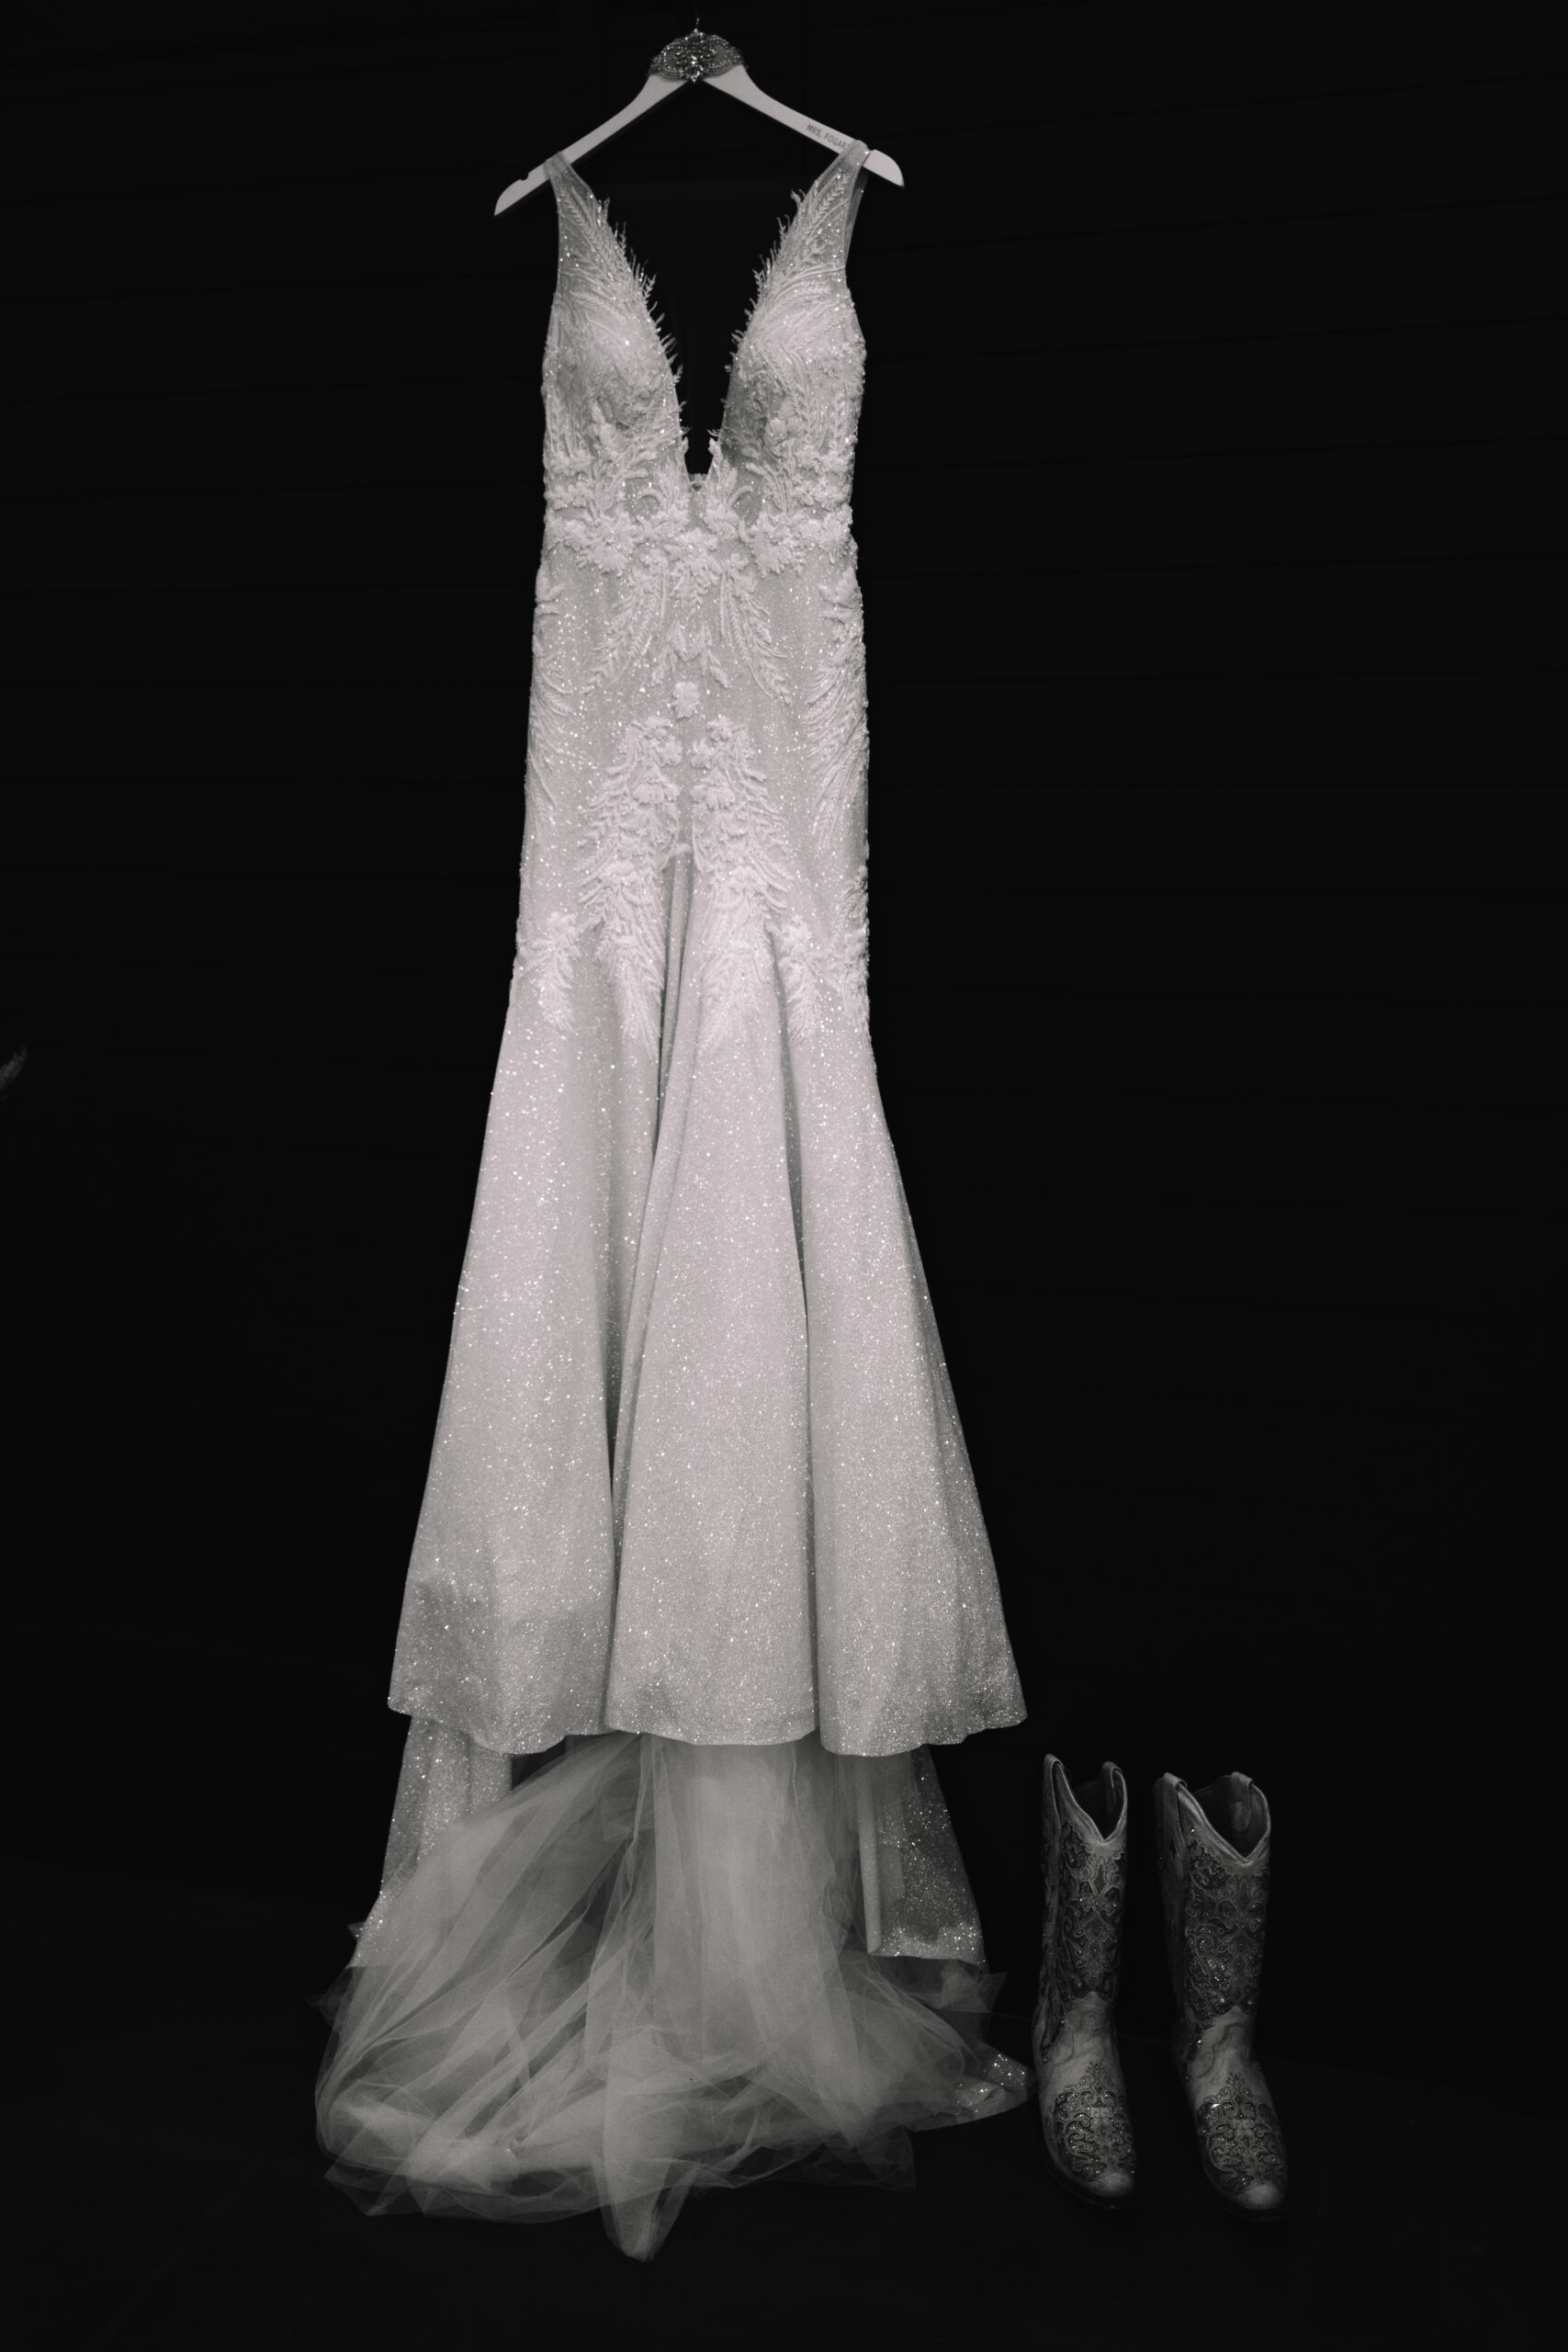 Wedding shot of a sparkly wedding dress with embroidery and lace hanging from a bridal hanger against a black back drop